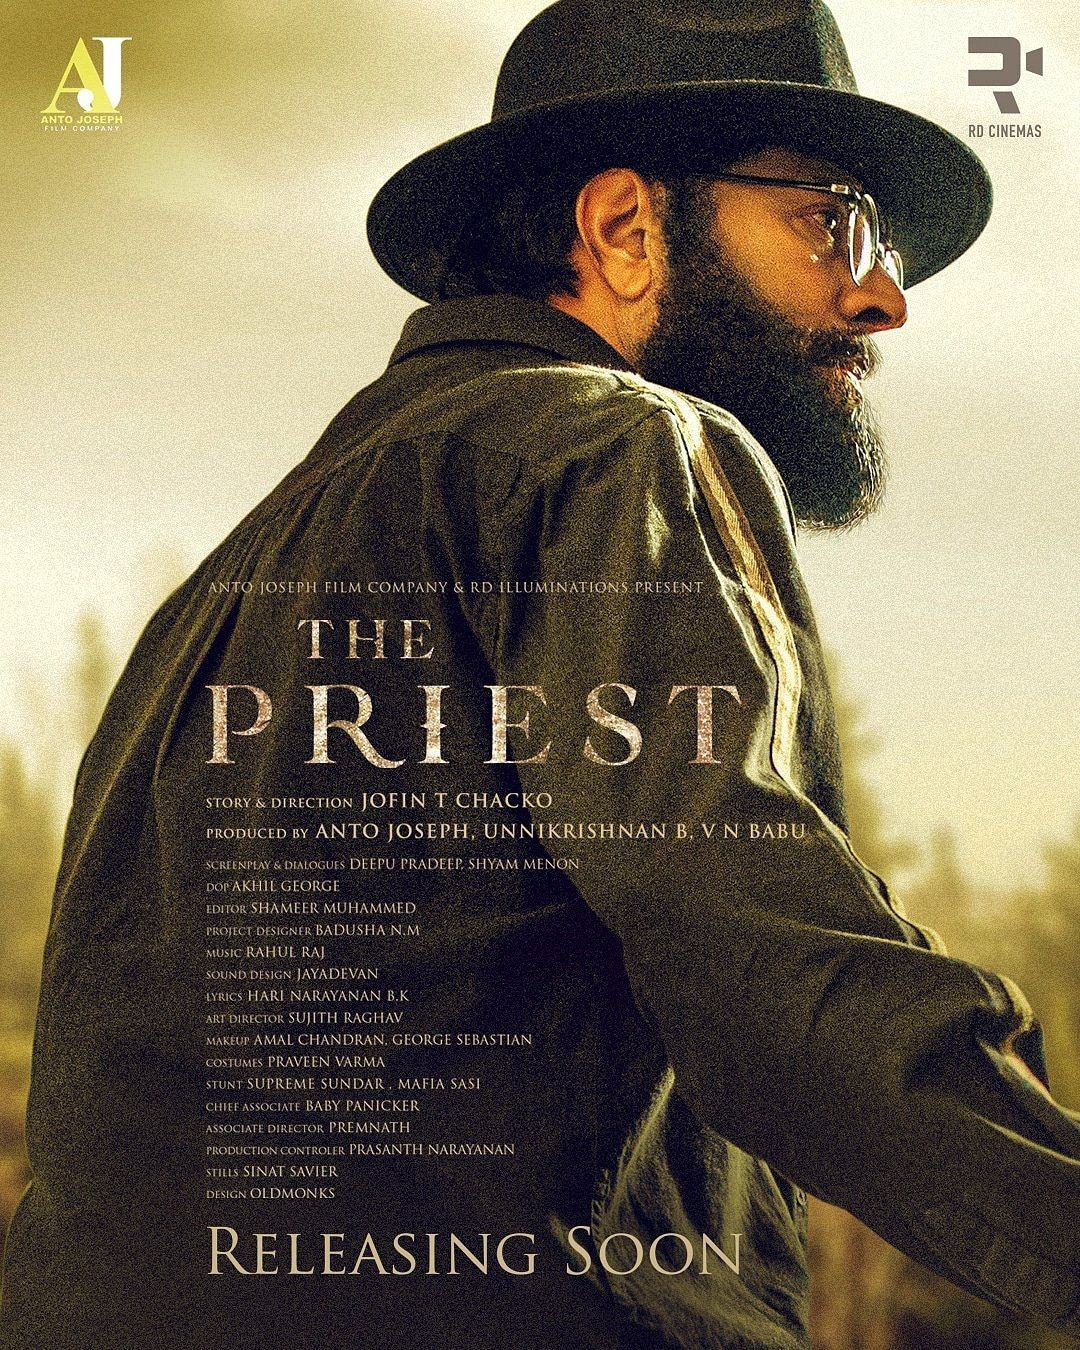 THE PRIEST New Poster